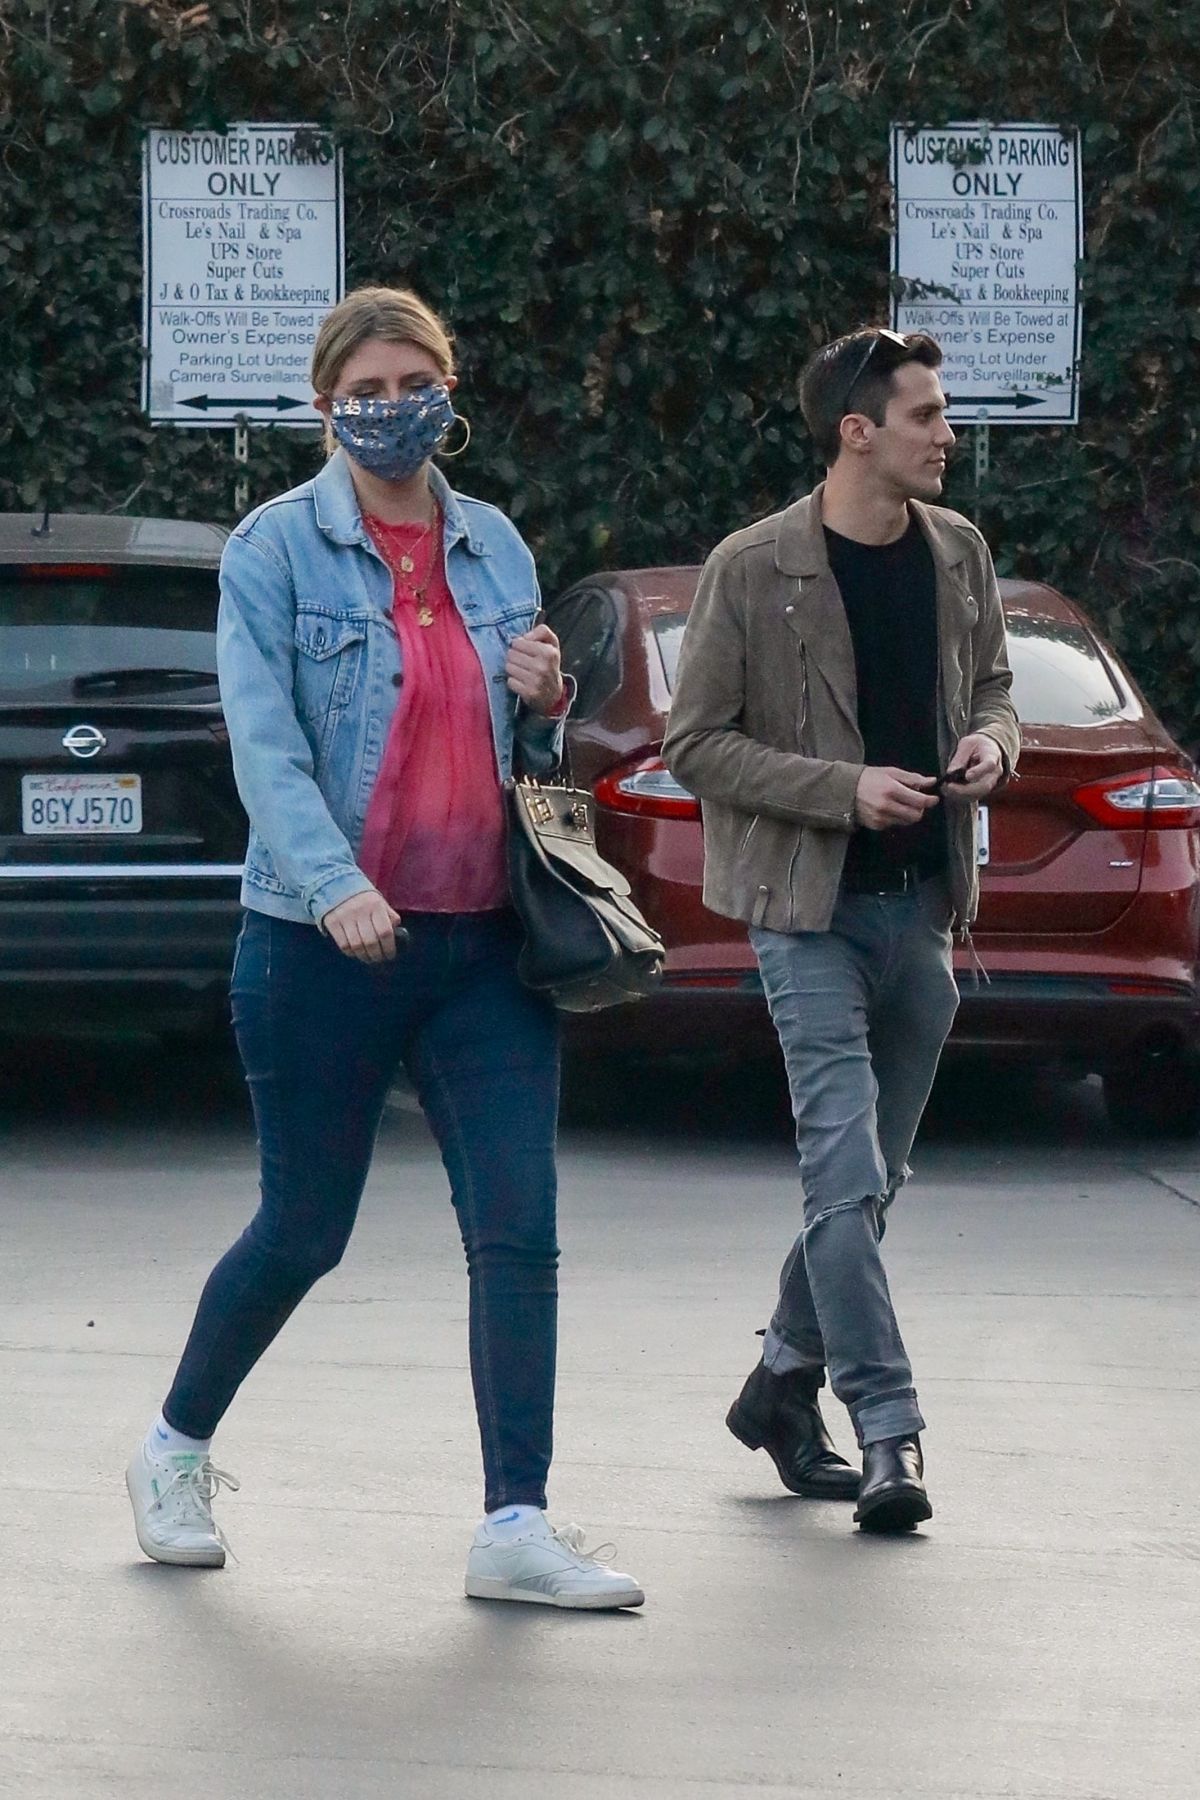 mischa-barton-and-gian-marco-flamini-at-tomato-pie-pizza-joint-in-los-angeles-11-20-2020-5.jpg